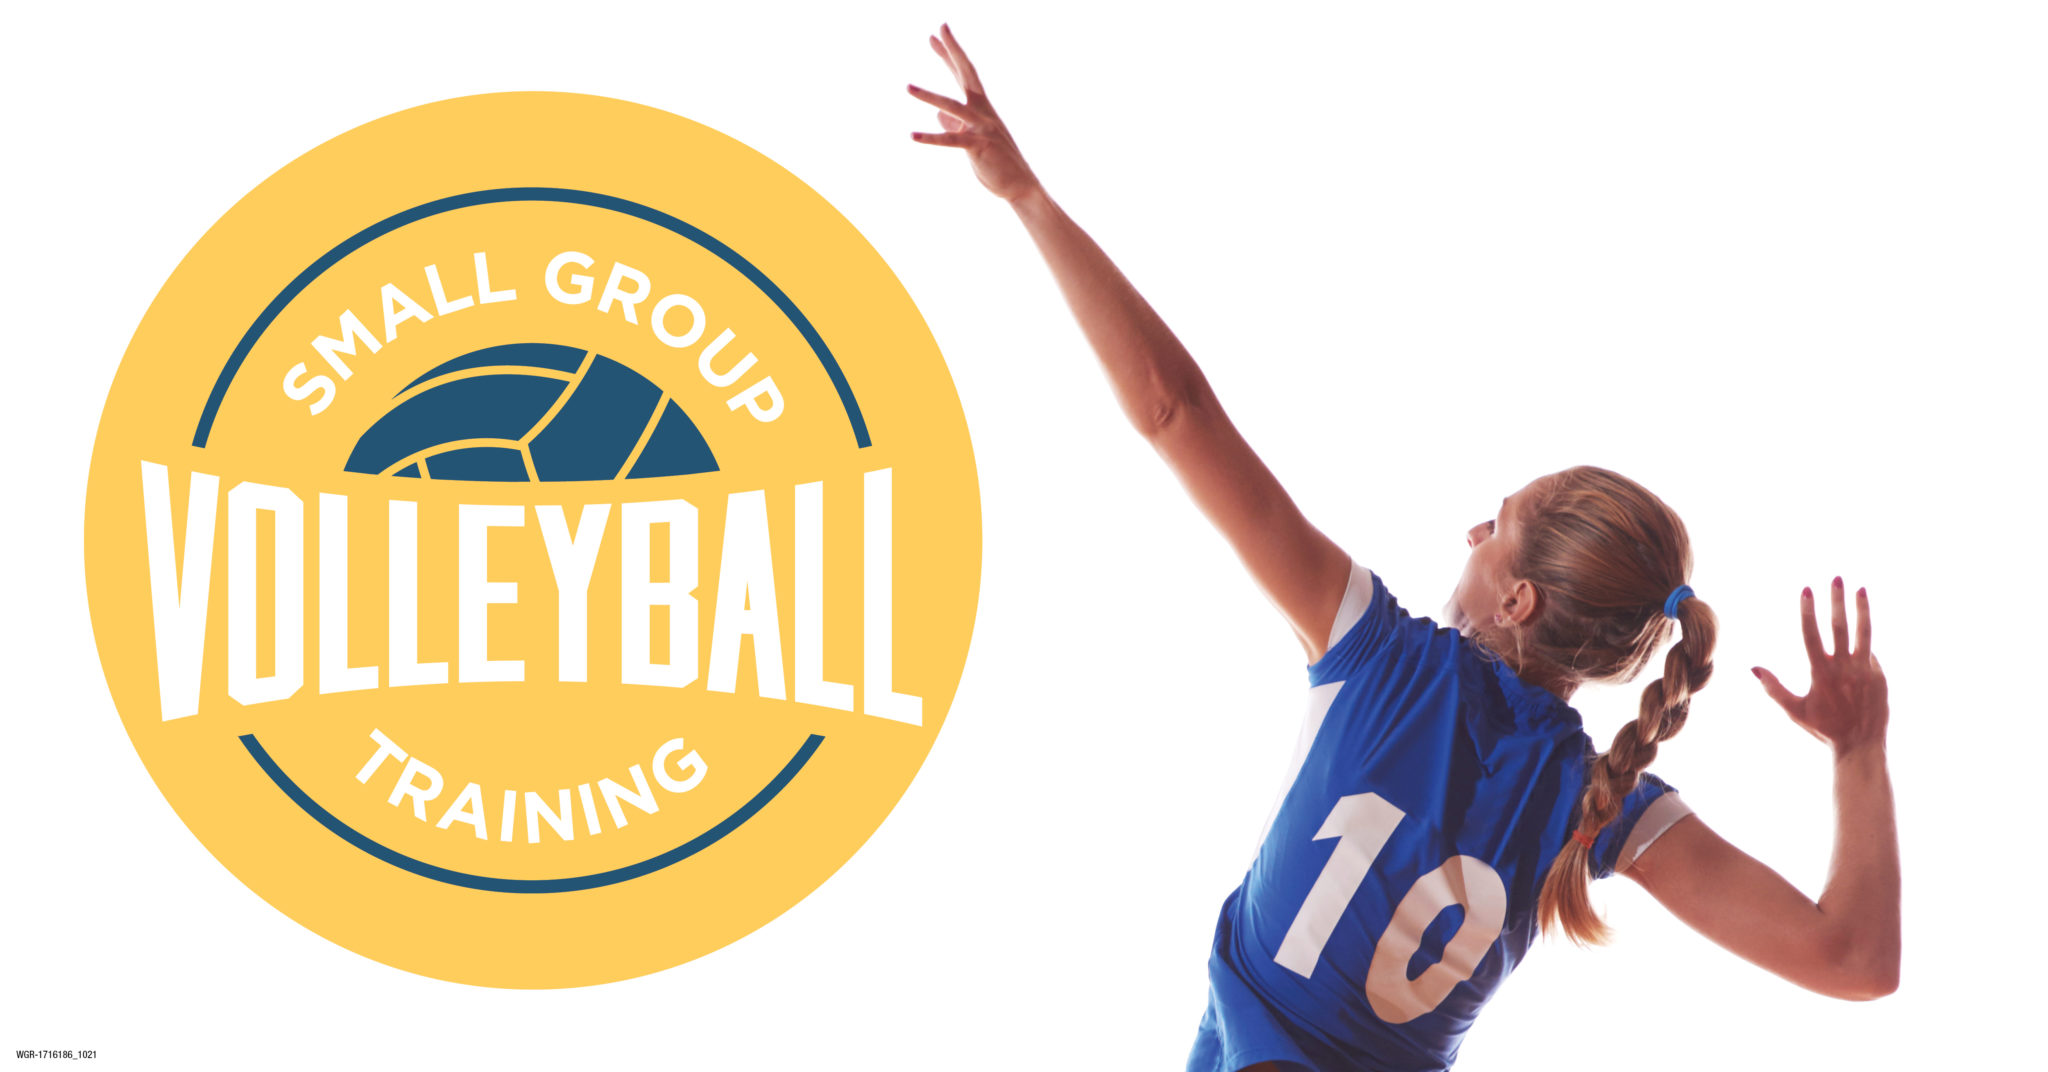 Volleyball Small Group Training